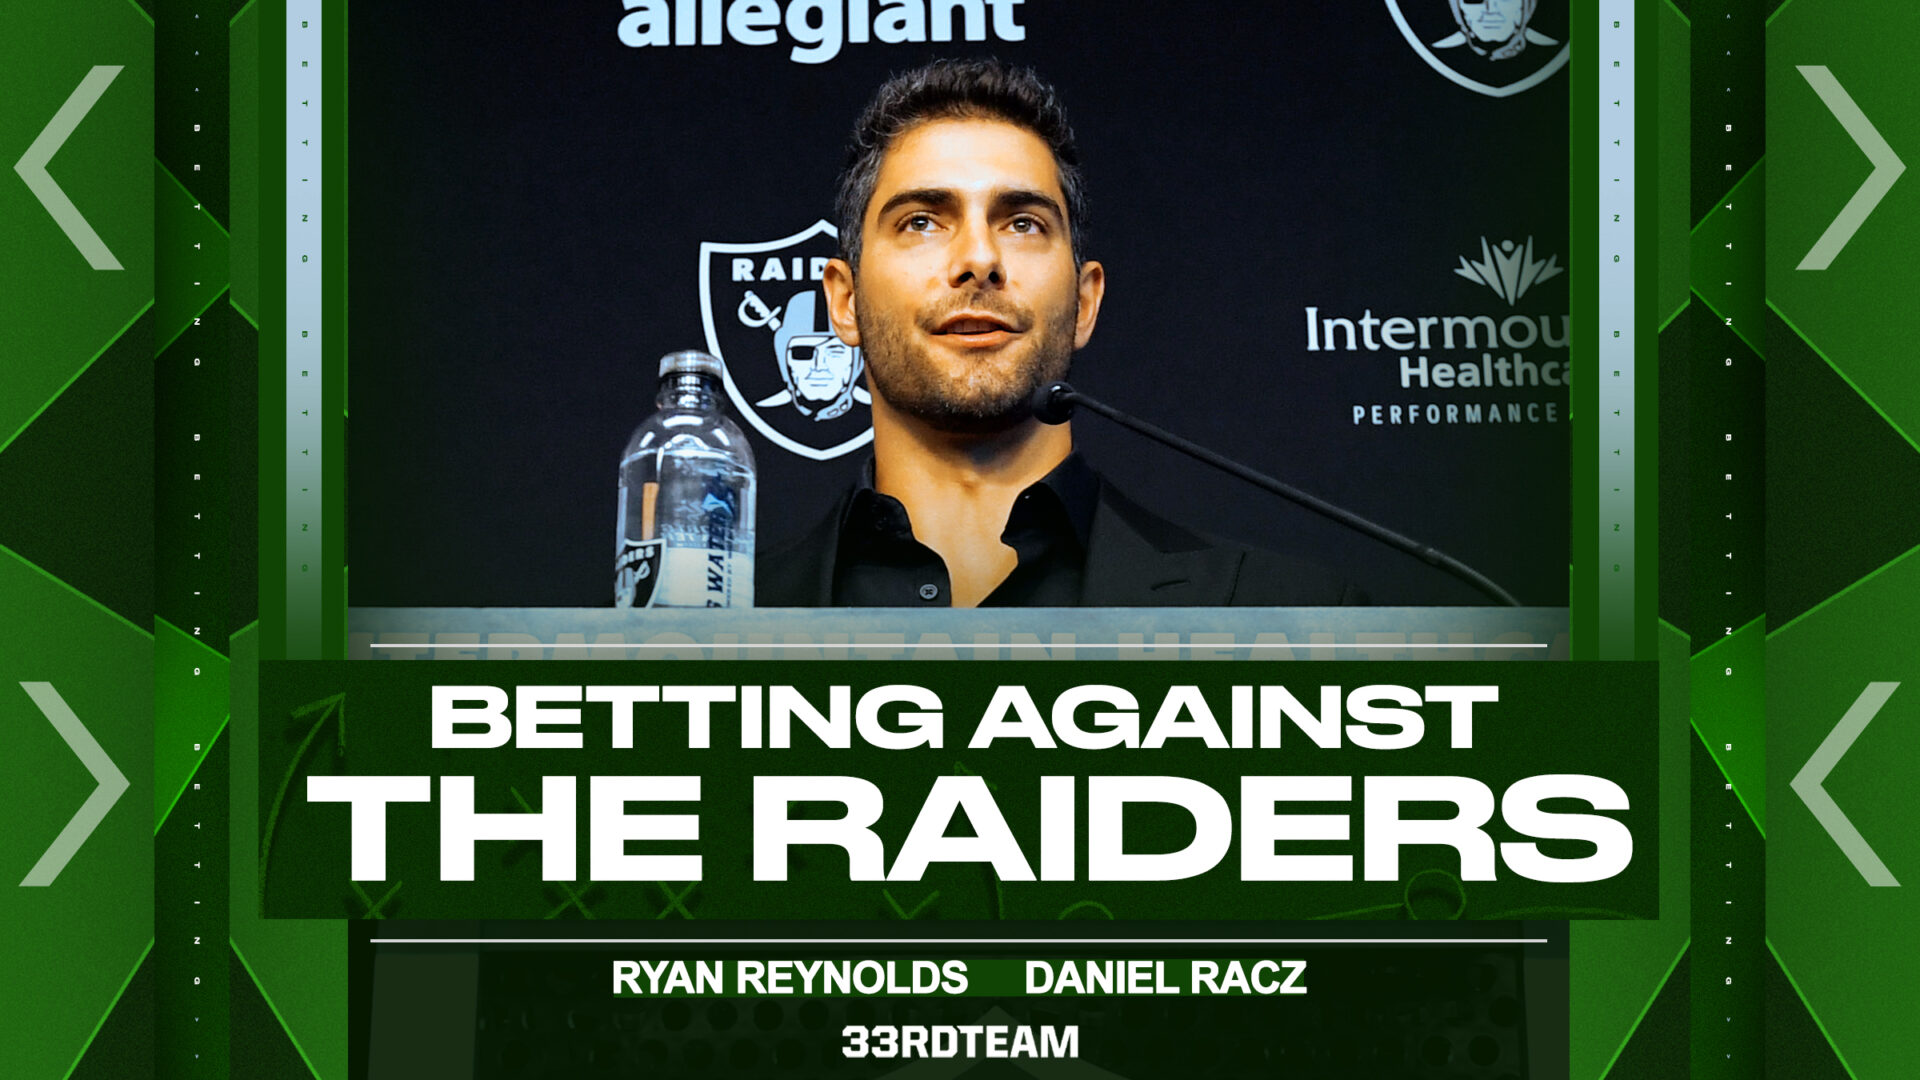 A green graphic that features an image of Jimmy Garoppolo at a Las Vegas Raiders press conference with text that reads: “Betting Against the Raiders; Ryan Reynolds, Daniel Racz; 33rd Team”